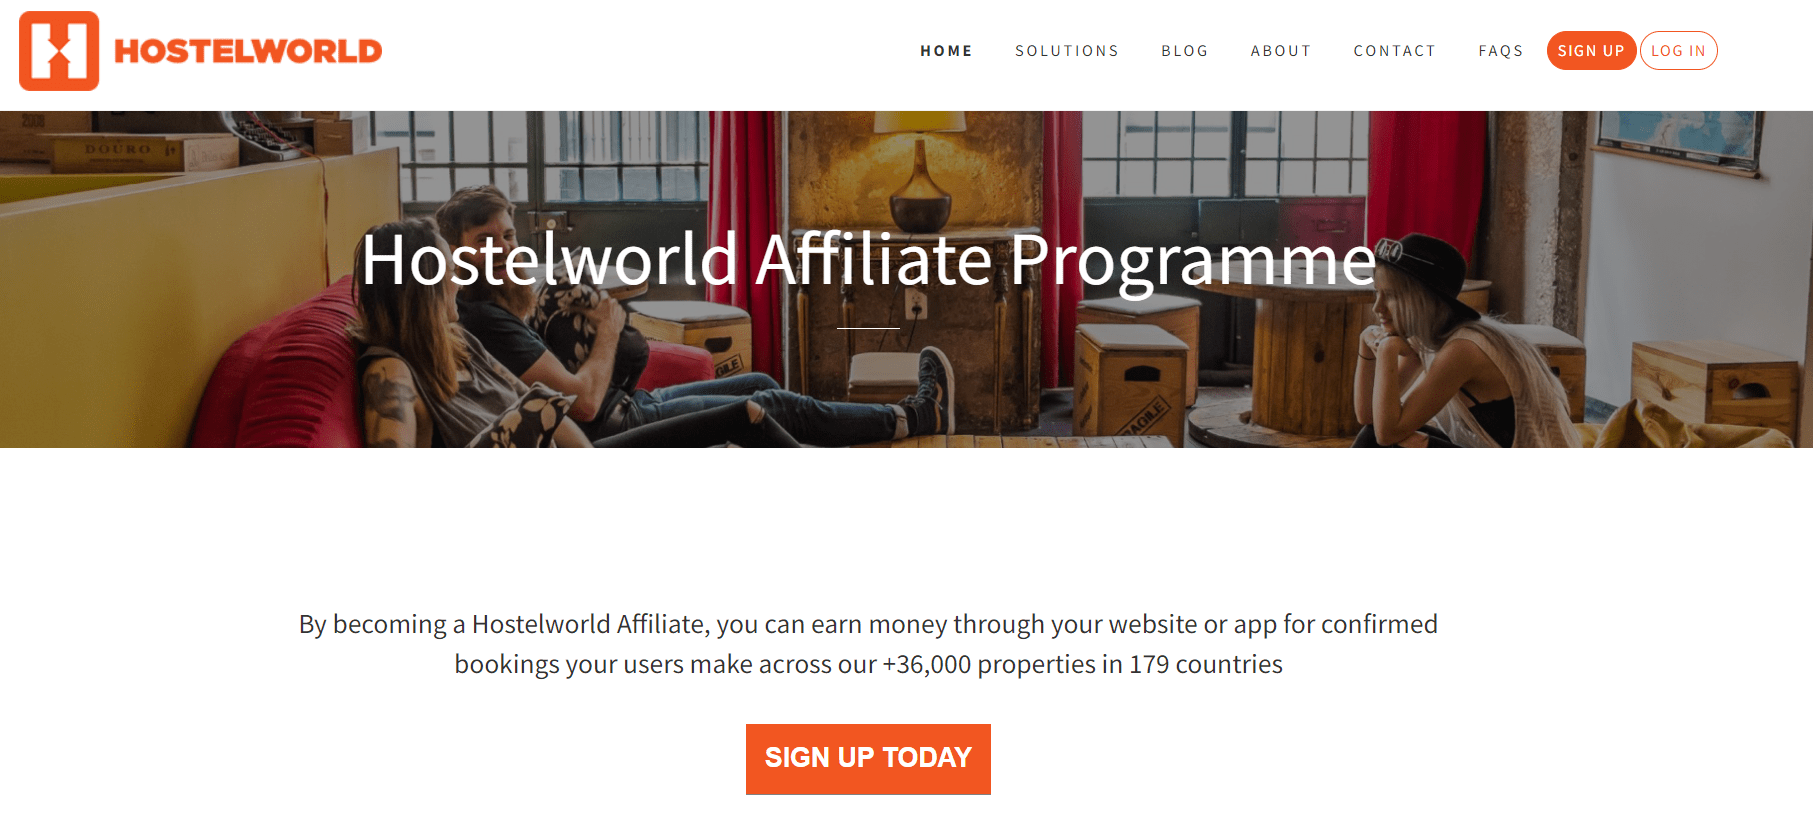 HostelWorld Overview